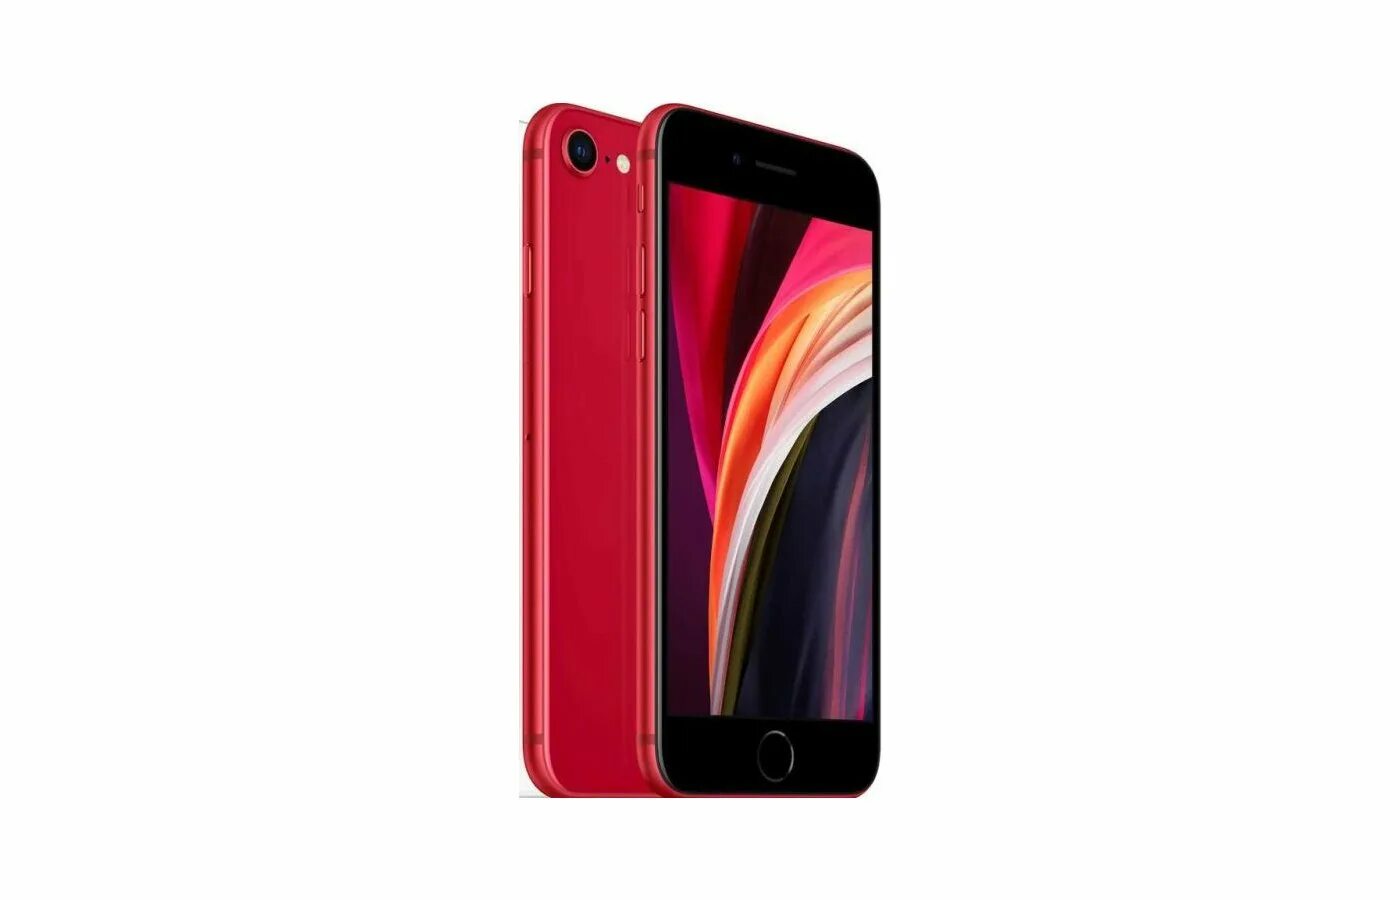 Iphone se (2020) 128gb Red. Apple iphone se 2020 128gb Red. Смартфон Apple iphone se 2020 64gb Black. Apple iphone se 2020 64gb Red. Apple se 2020 64gb